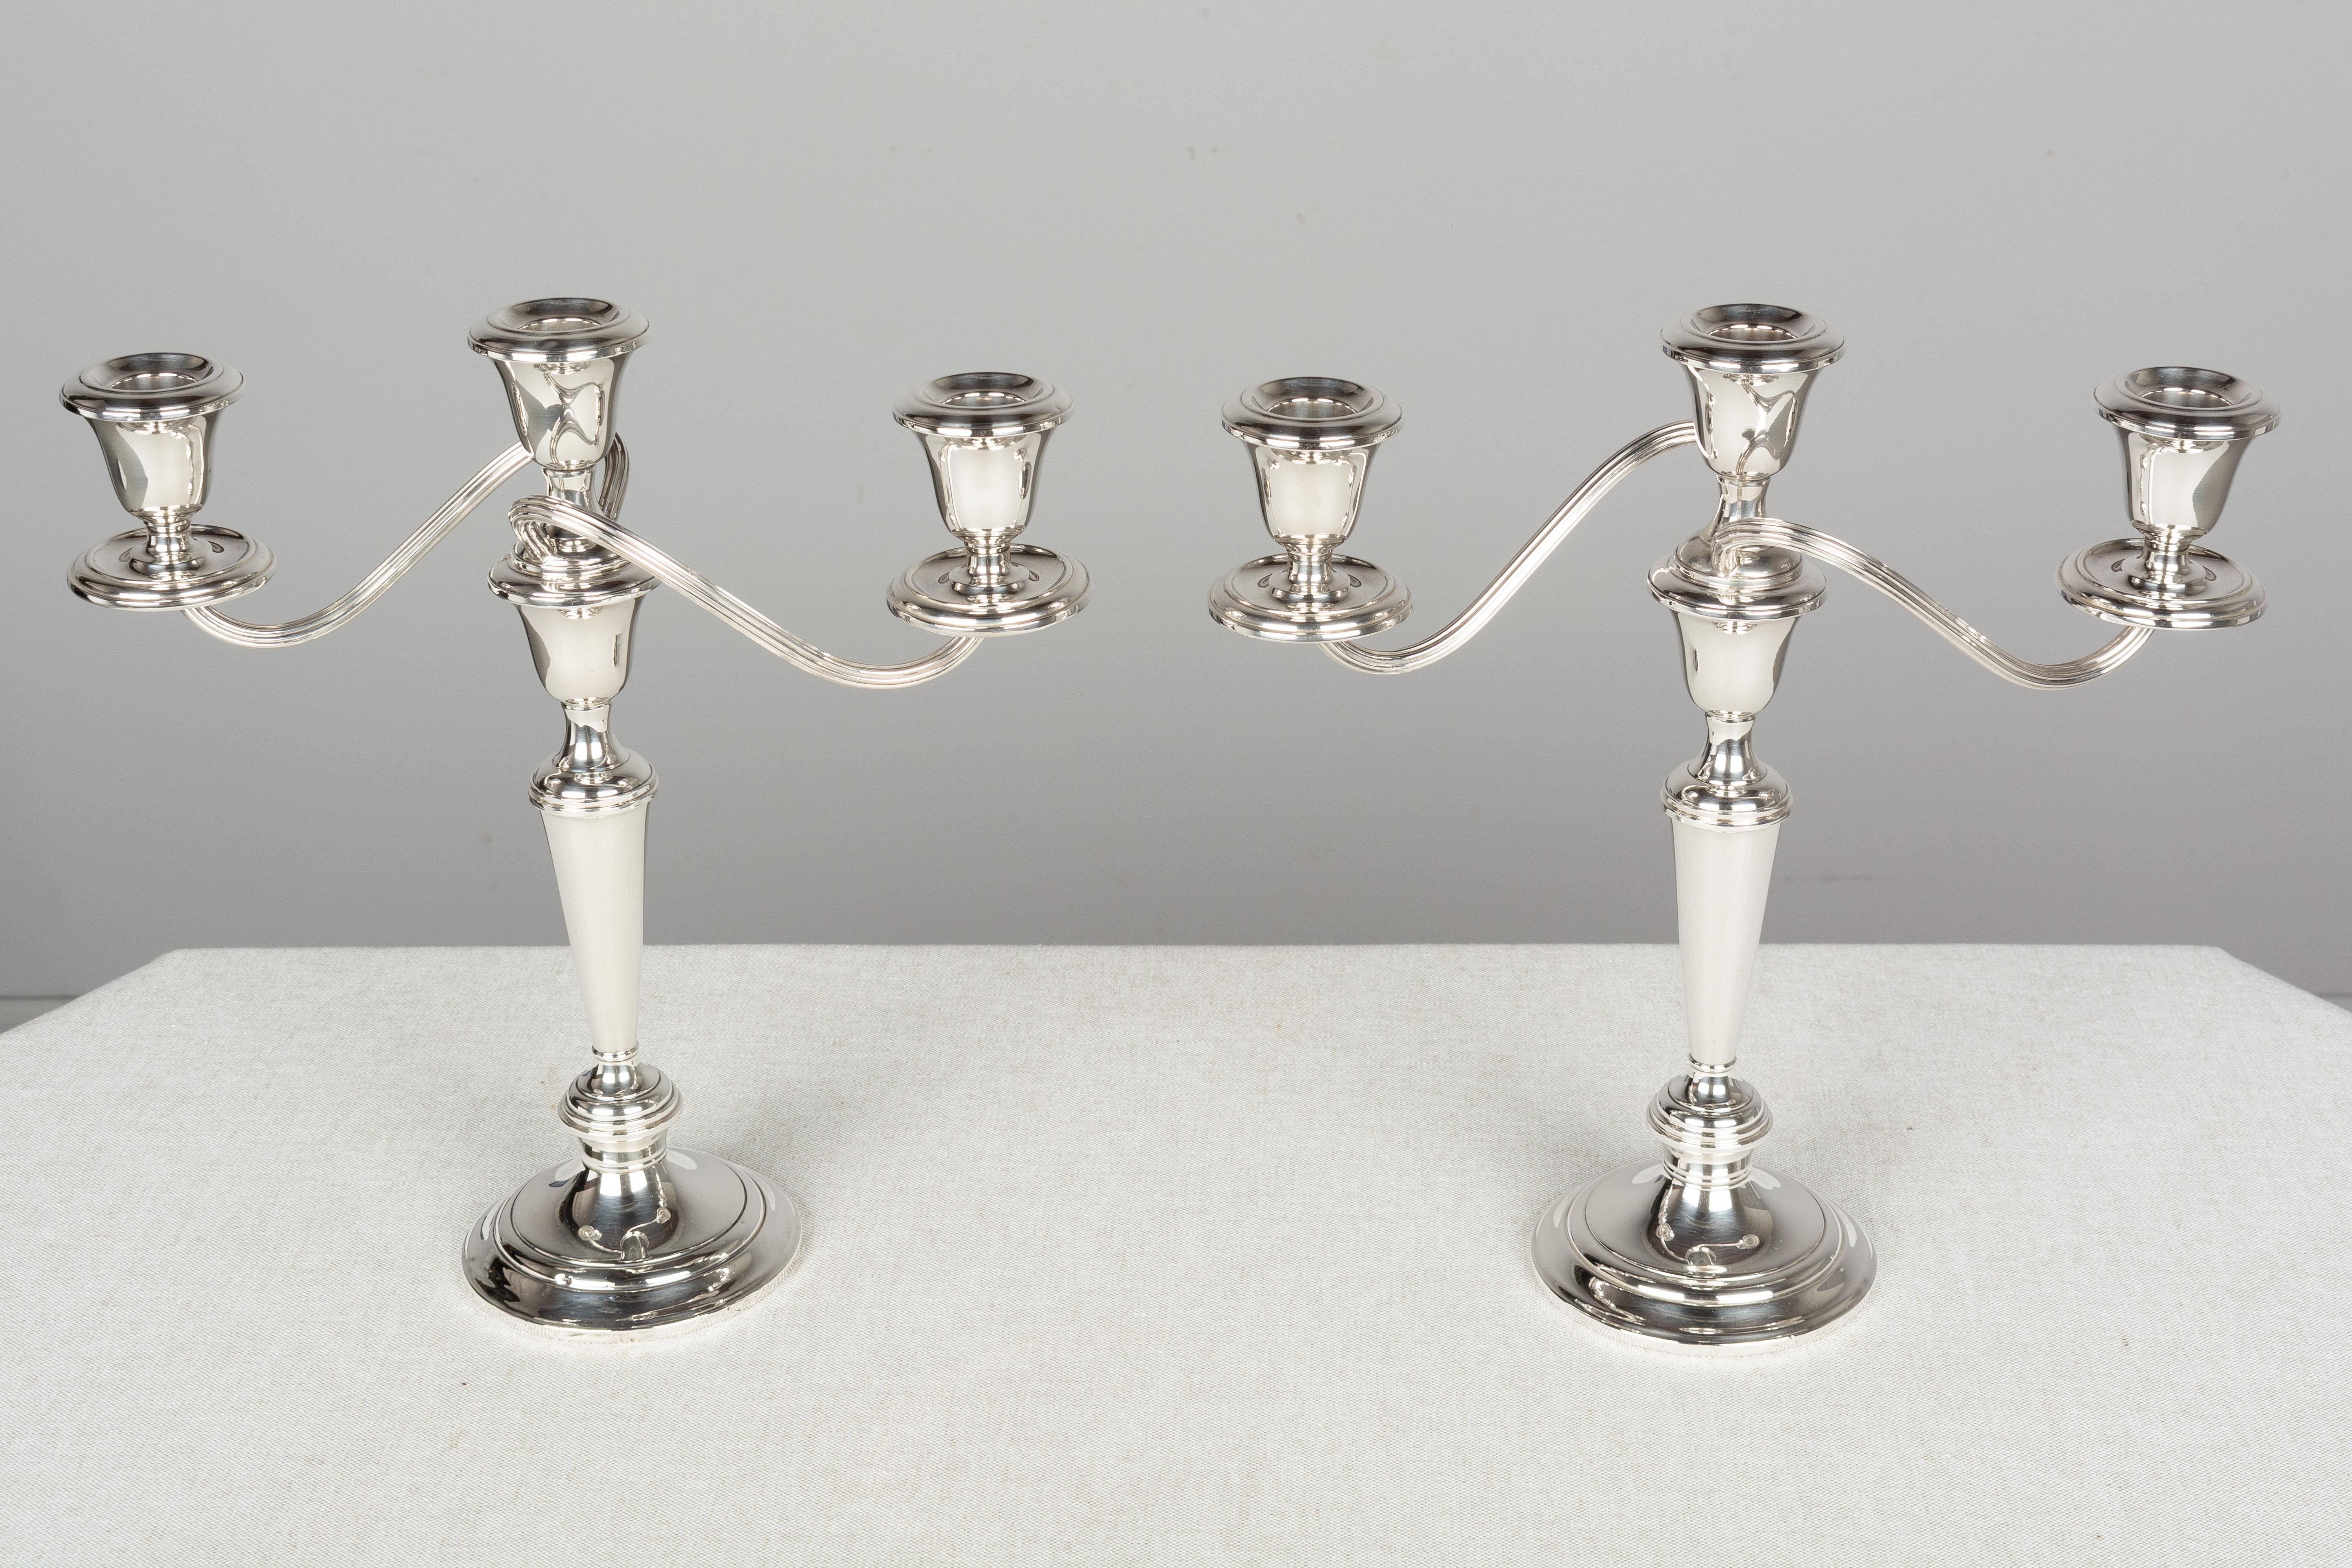 A pair of weighted 3-light sterling silver candelabra in the Puritan pattern by Gorham silversmiths. These were advertised as 